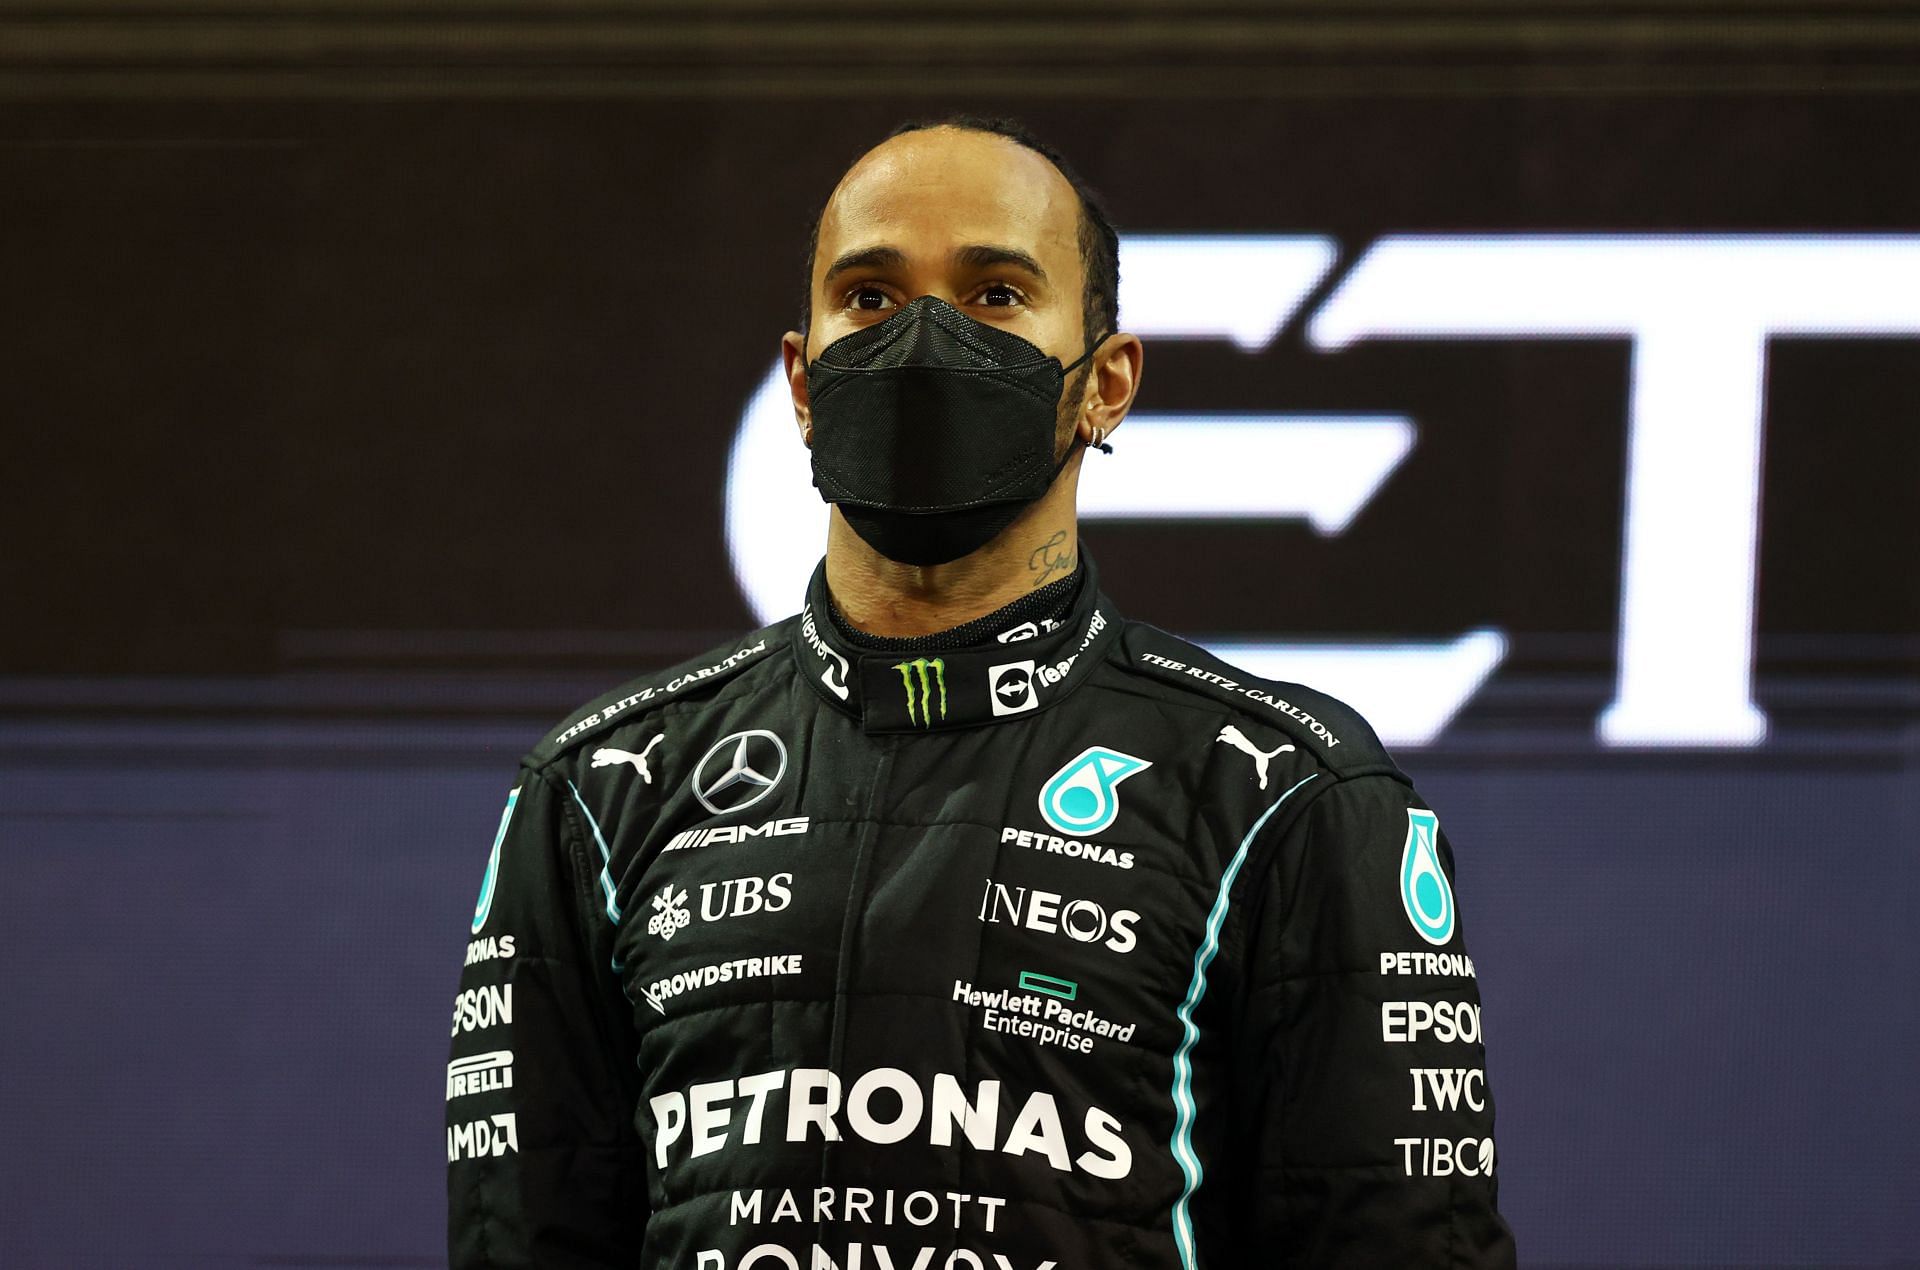 F1 Grand Prix of Abu Dhabi - Lewis Hamilton has made no public statement since his loss (Photo by Bryn Lennon/Getty Images)